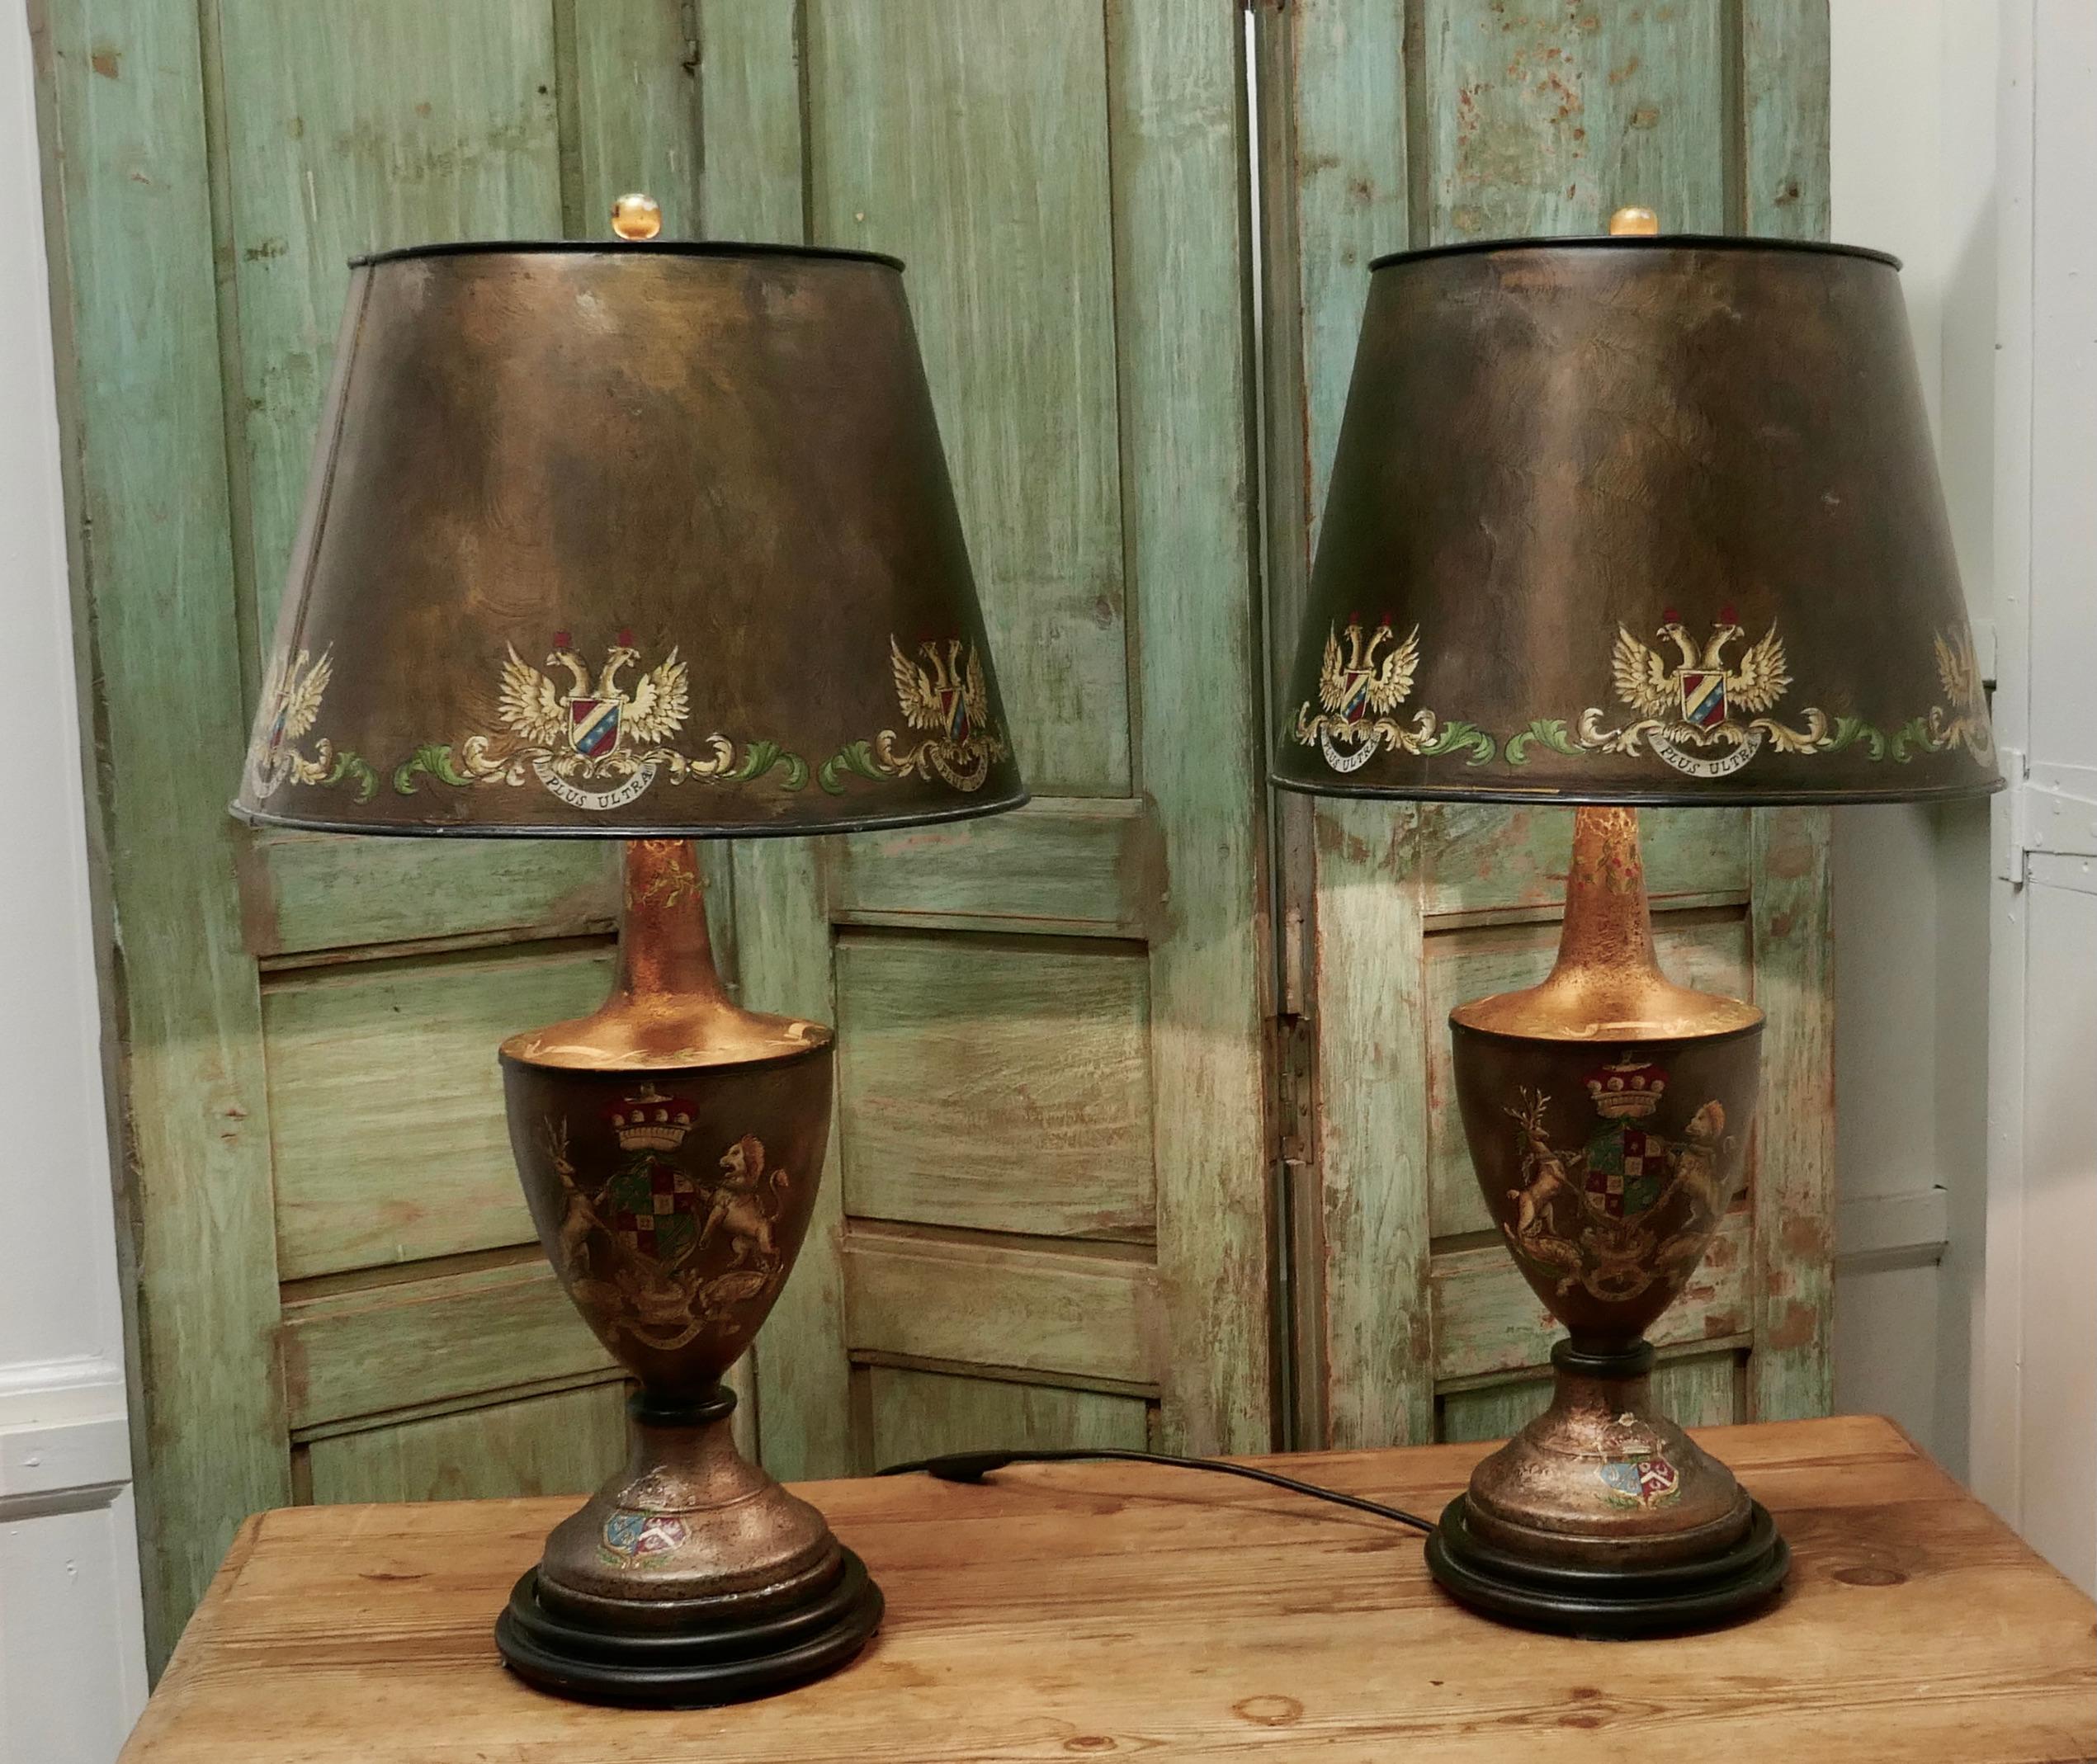 A pair of large bronze colored toleware table lamps

These large stunning lamps have an armorial crest theme they have matching shades, both lamps and shades have a crackle glaze finish and are hand painted 
The lamps are fully wired and in very